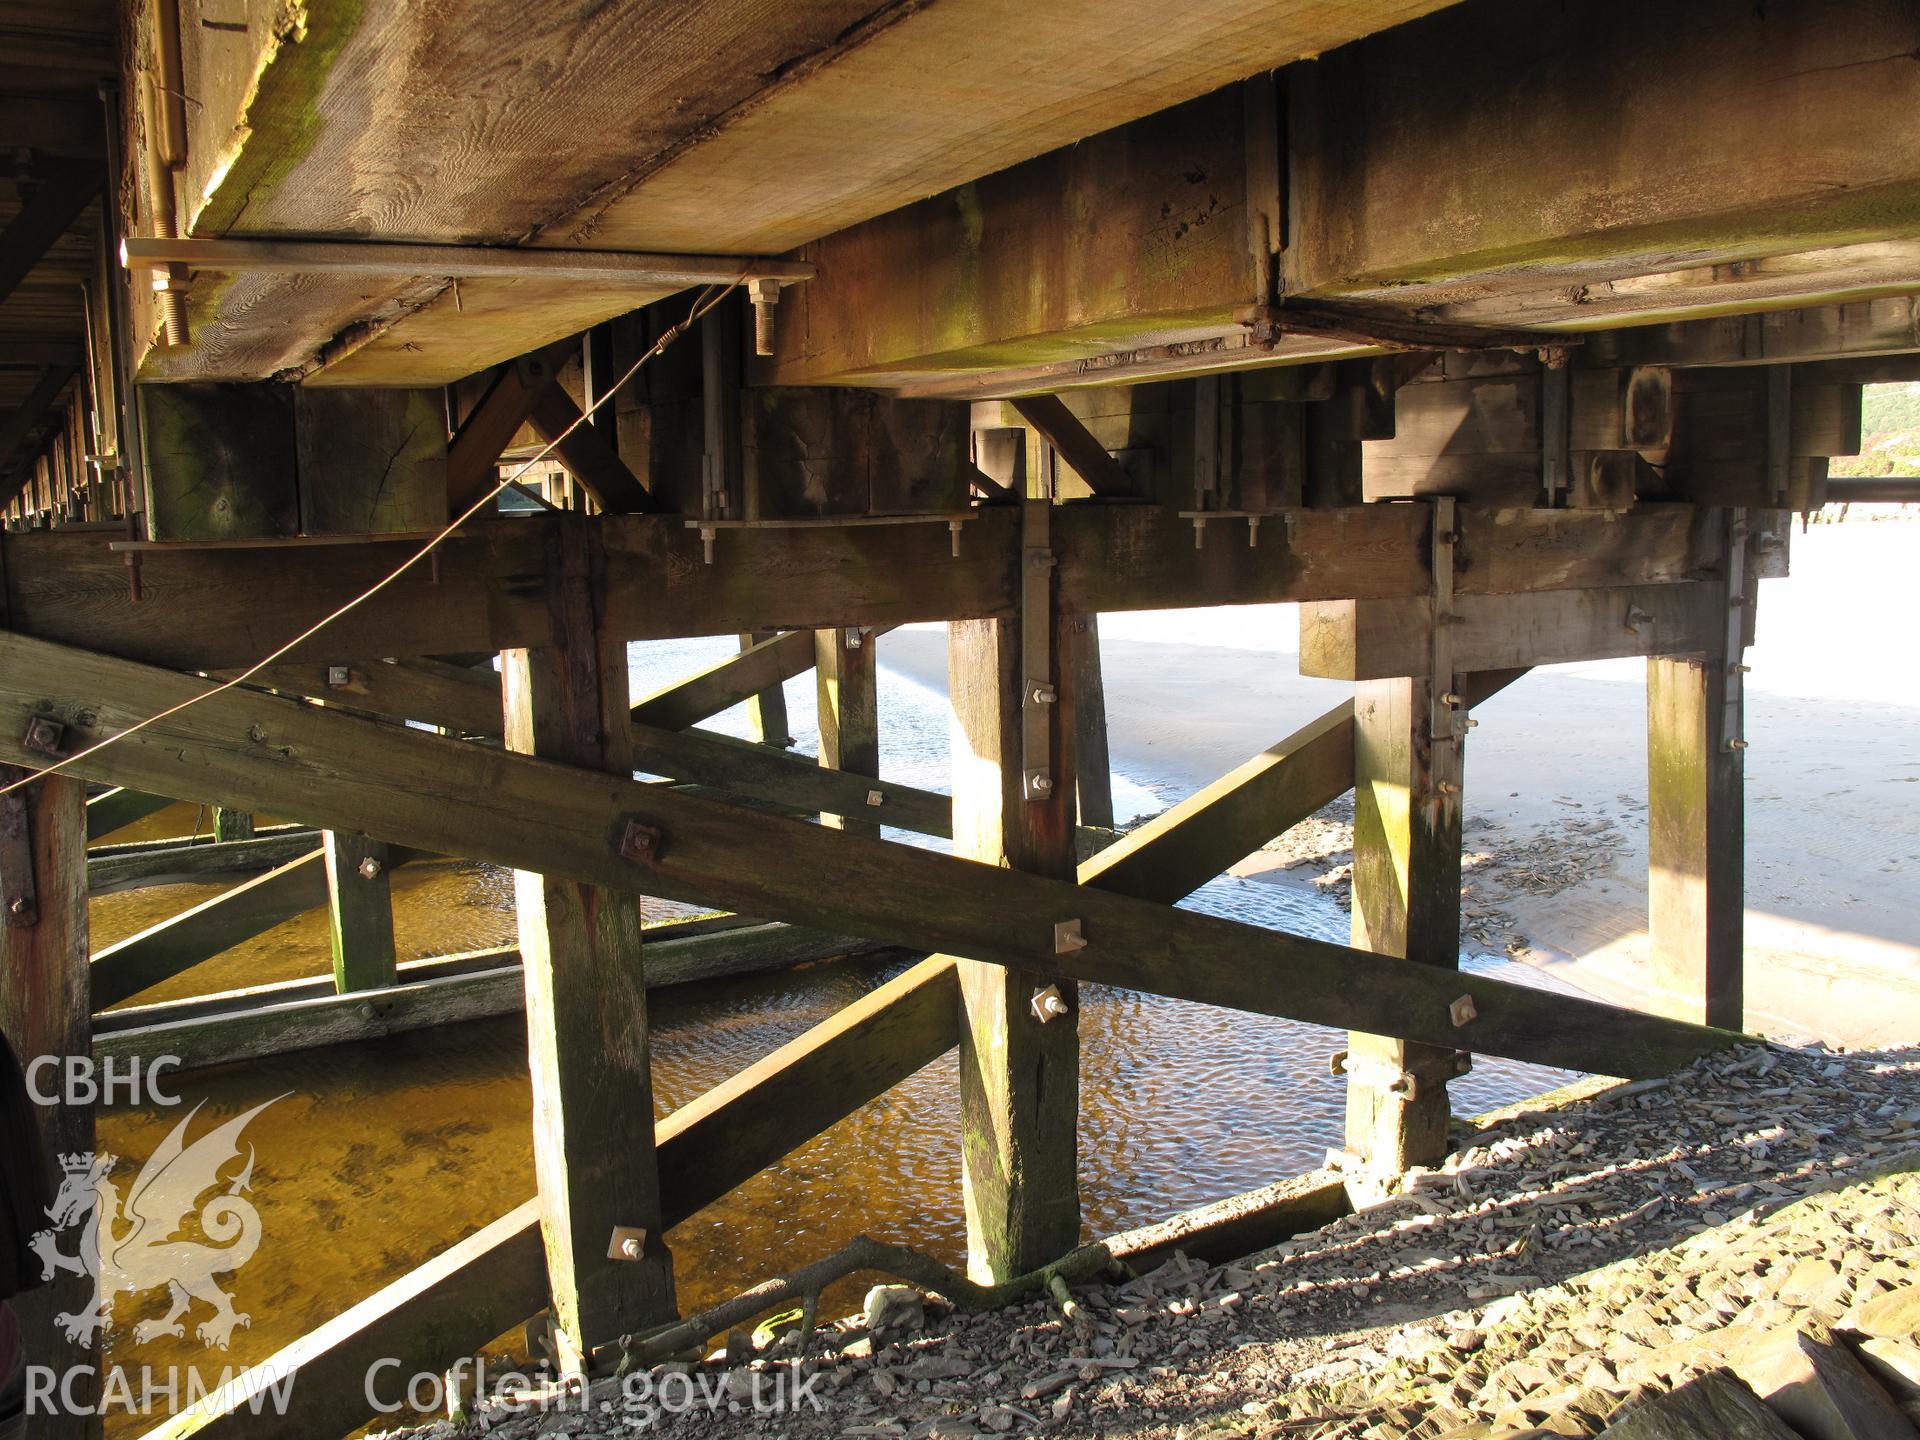 Detail view of the timber construction of Pont Briwet from the south.